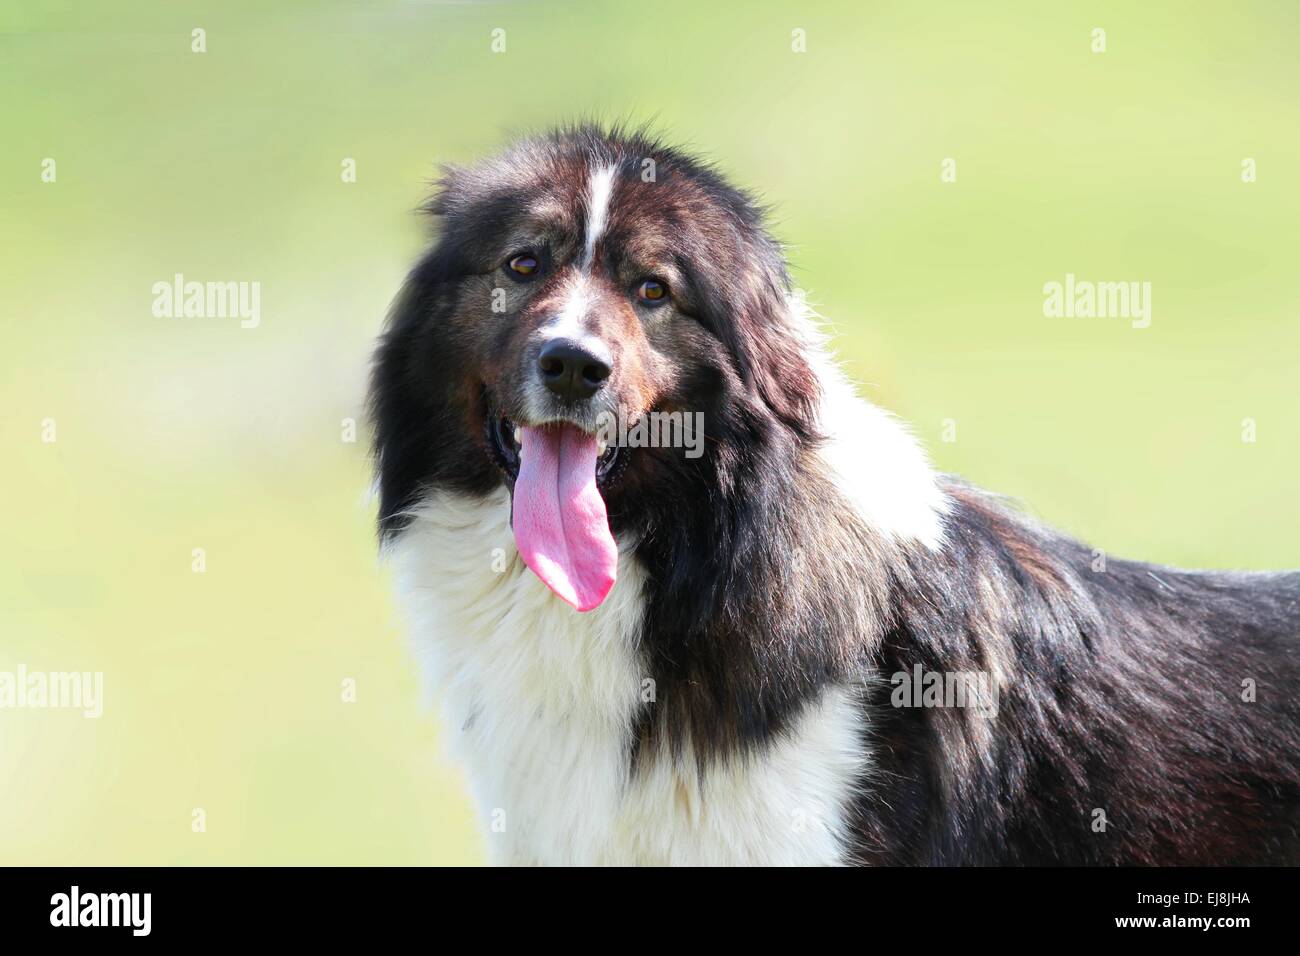 Cute domestic dog sticking out its tongue Stock Photo